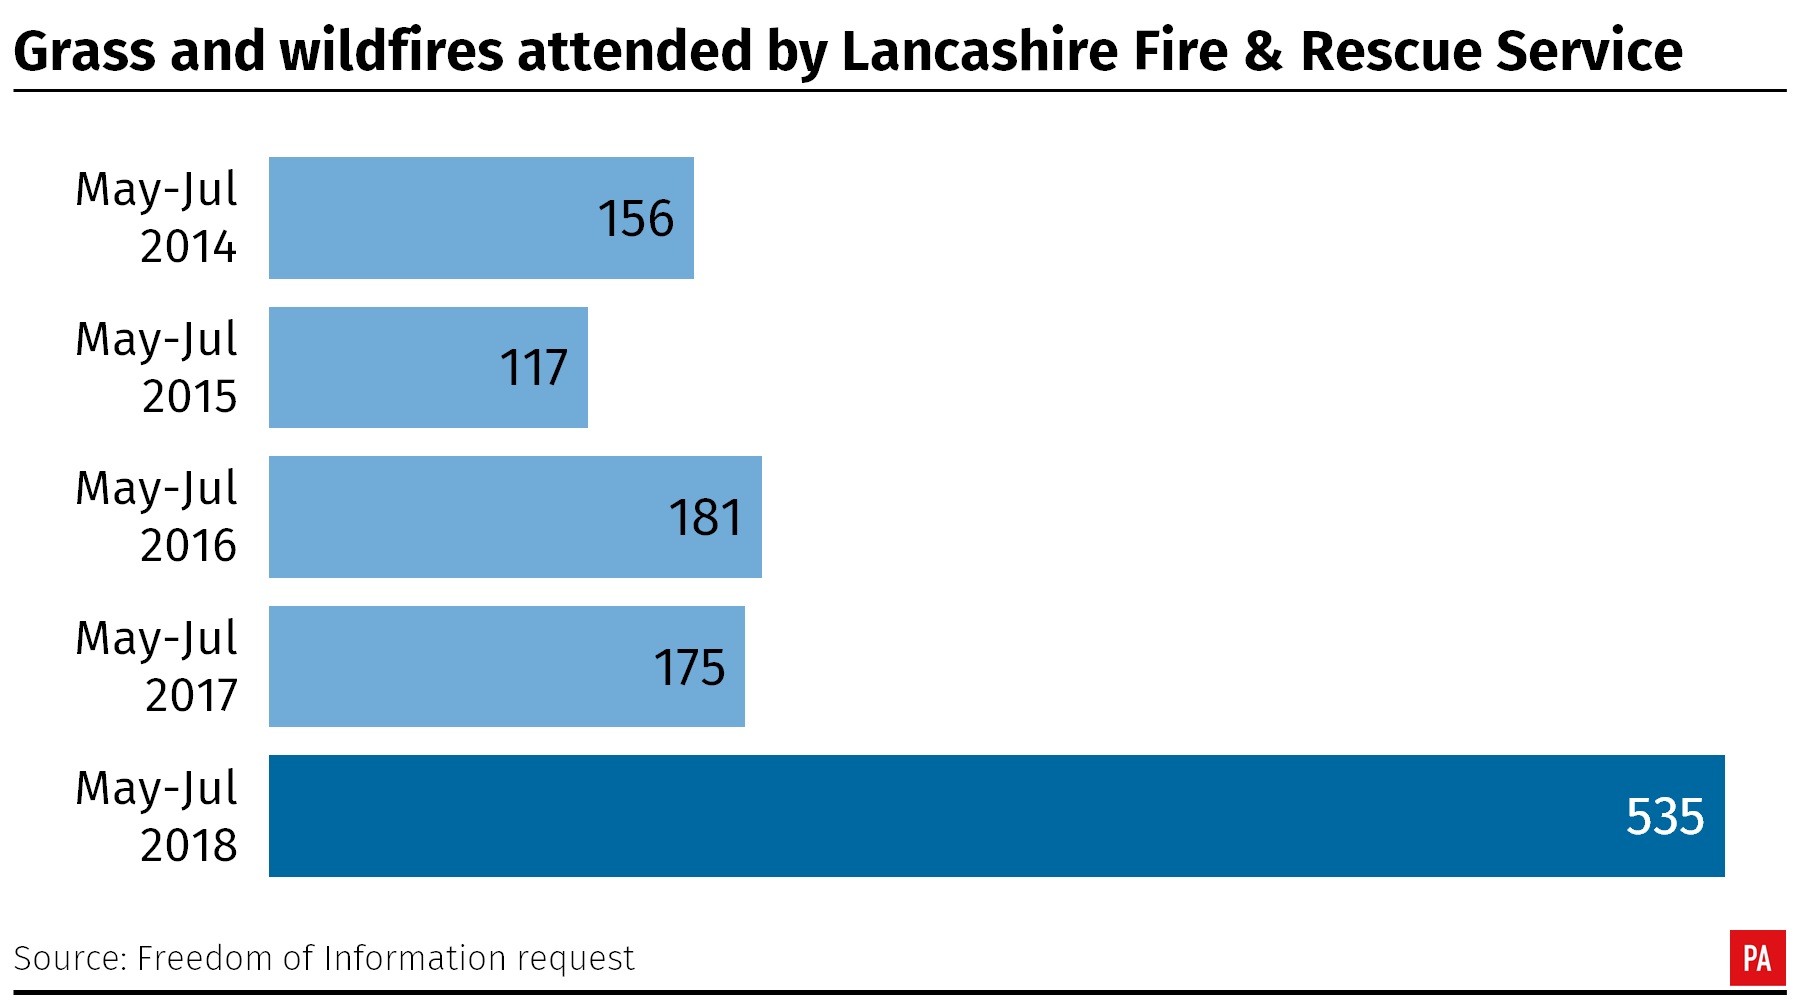 A bar graph showing 535 wildfires in Lancashire between May and July in 2018